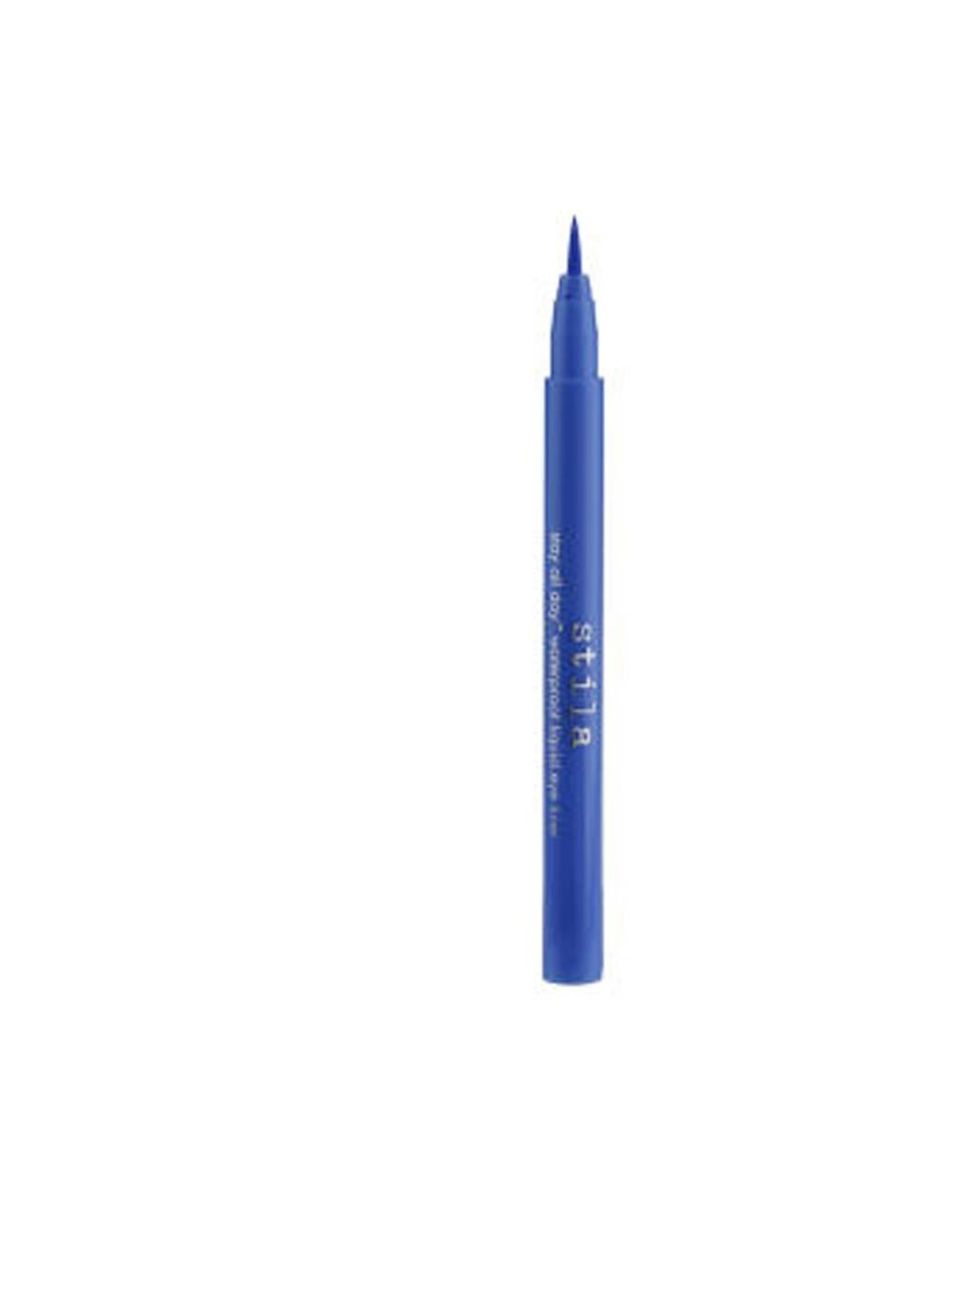 <p><a href="http://www.theukedit.com/stila-stay-all-day-waterproof-liquid-eye-liner-cobalt-limited-edition/10837057.html">Stila Stay All Day Liquid Liner in Cobalt, £13</a></p><p>This is a limited edition tube of on-trend joy. Perfect for creating illumin